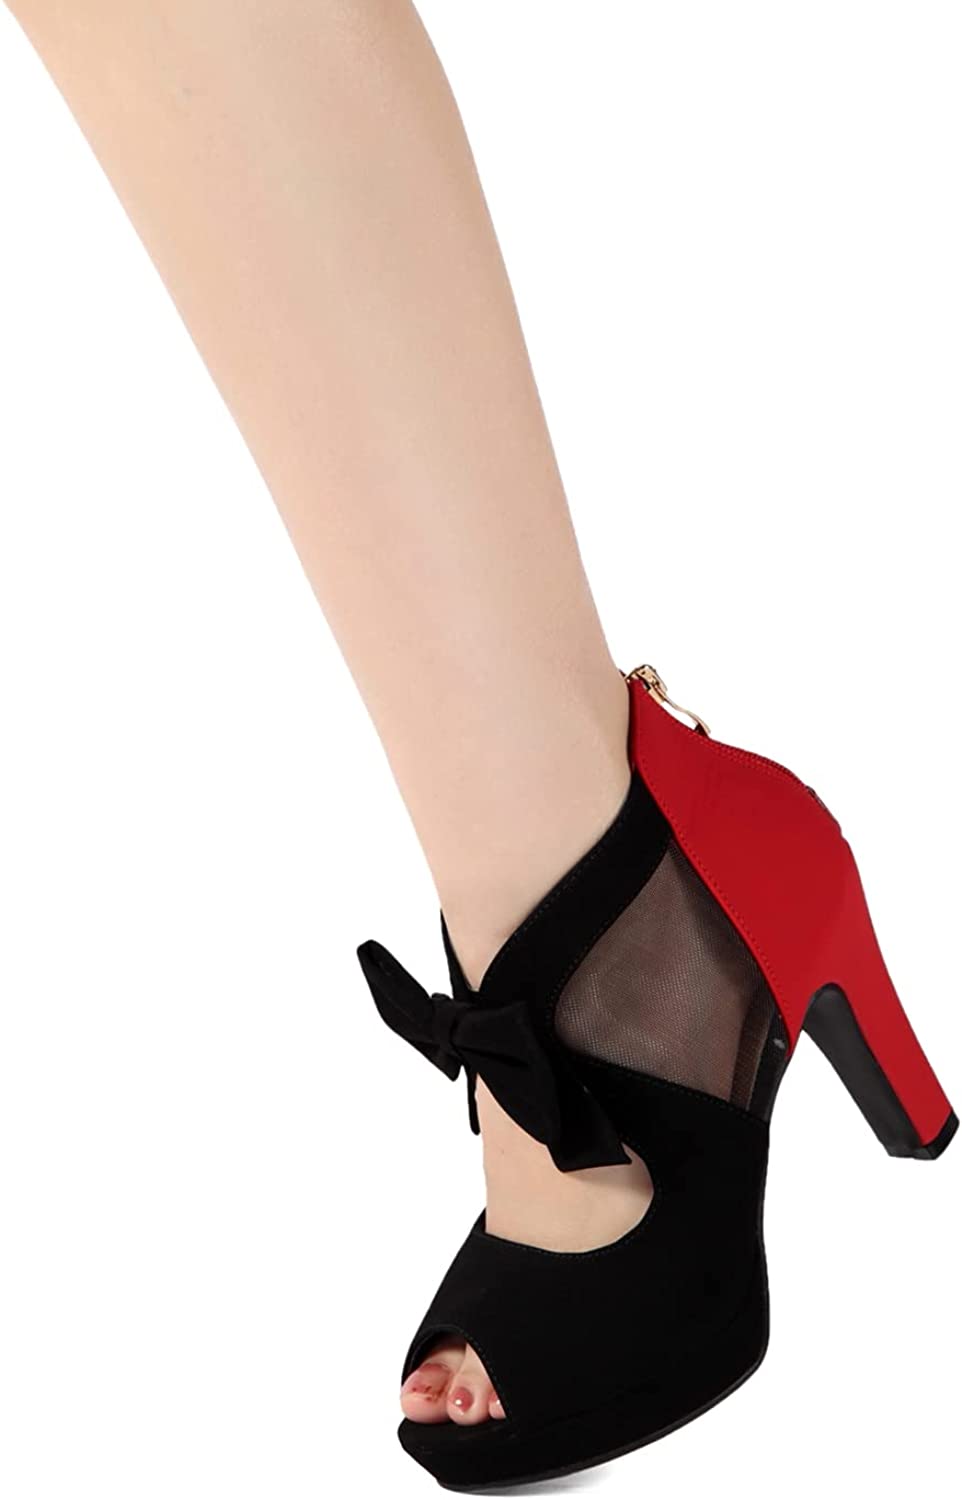 Open Toe Platform High Heel Shoes Bows Strappy Sandals